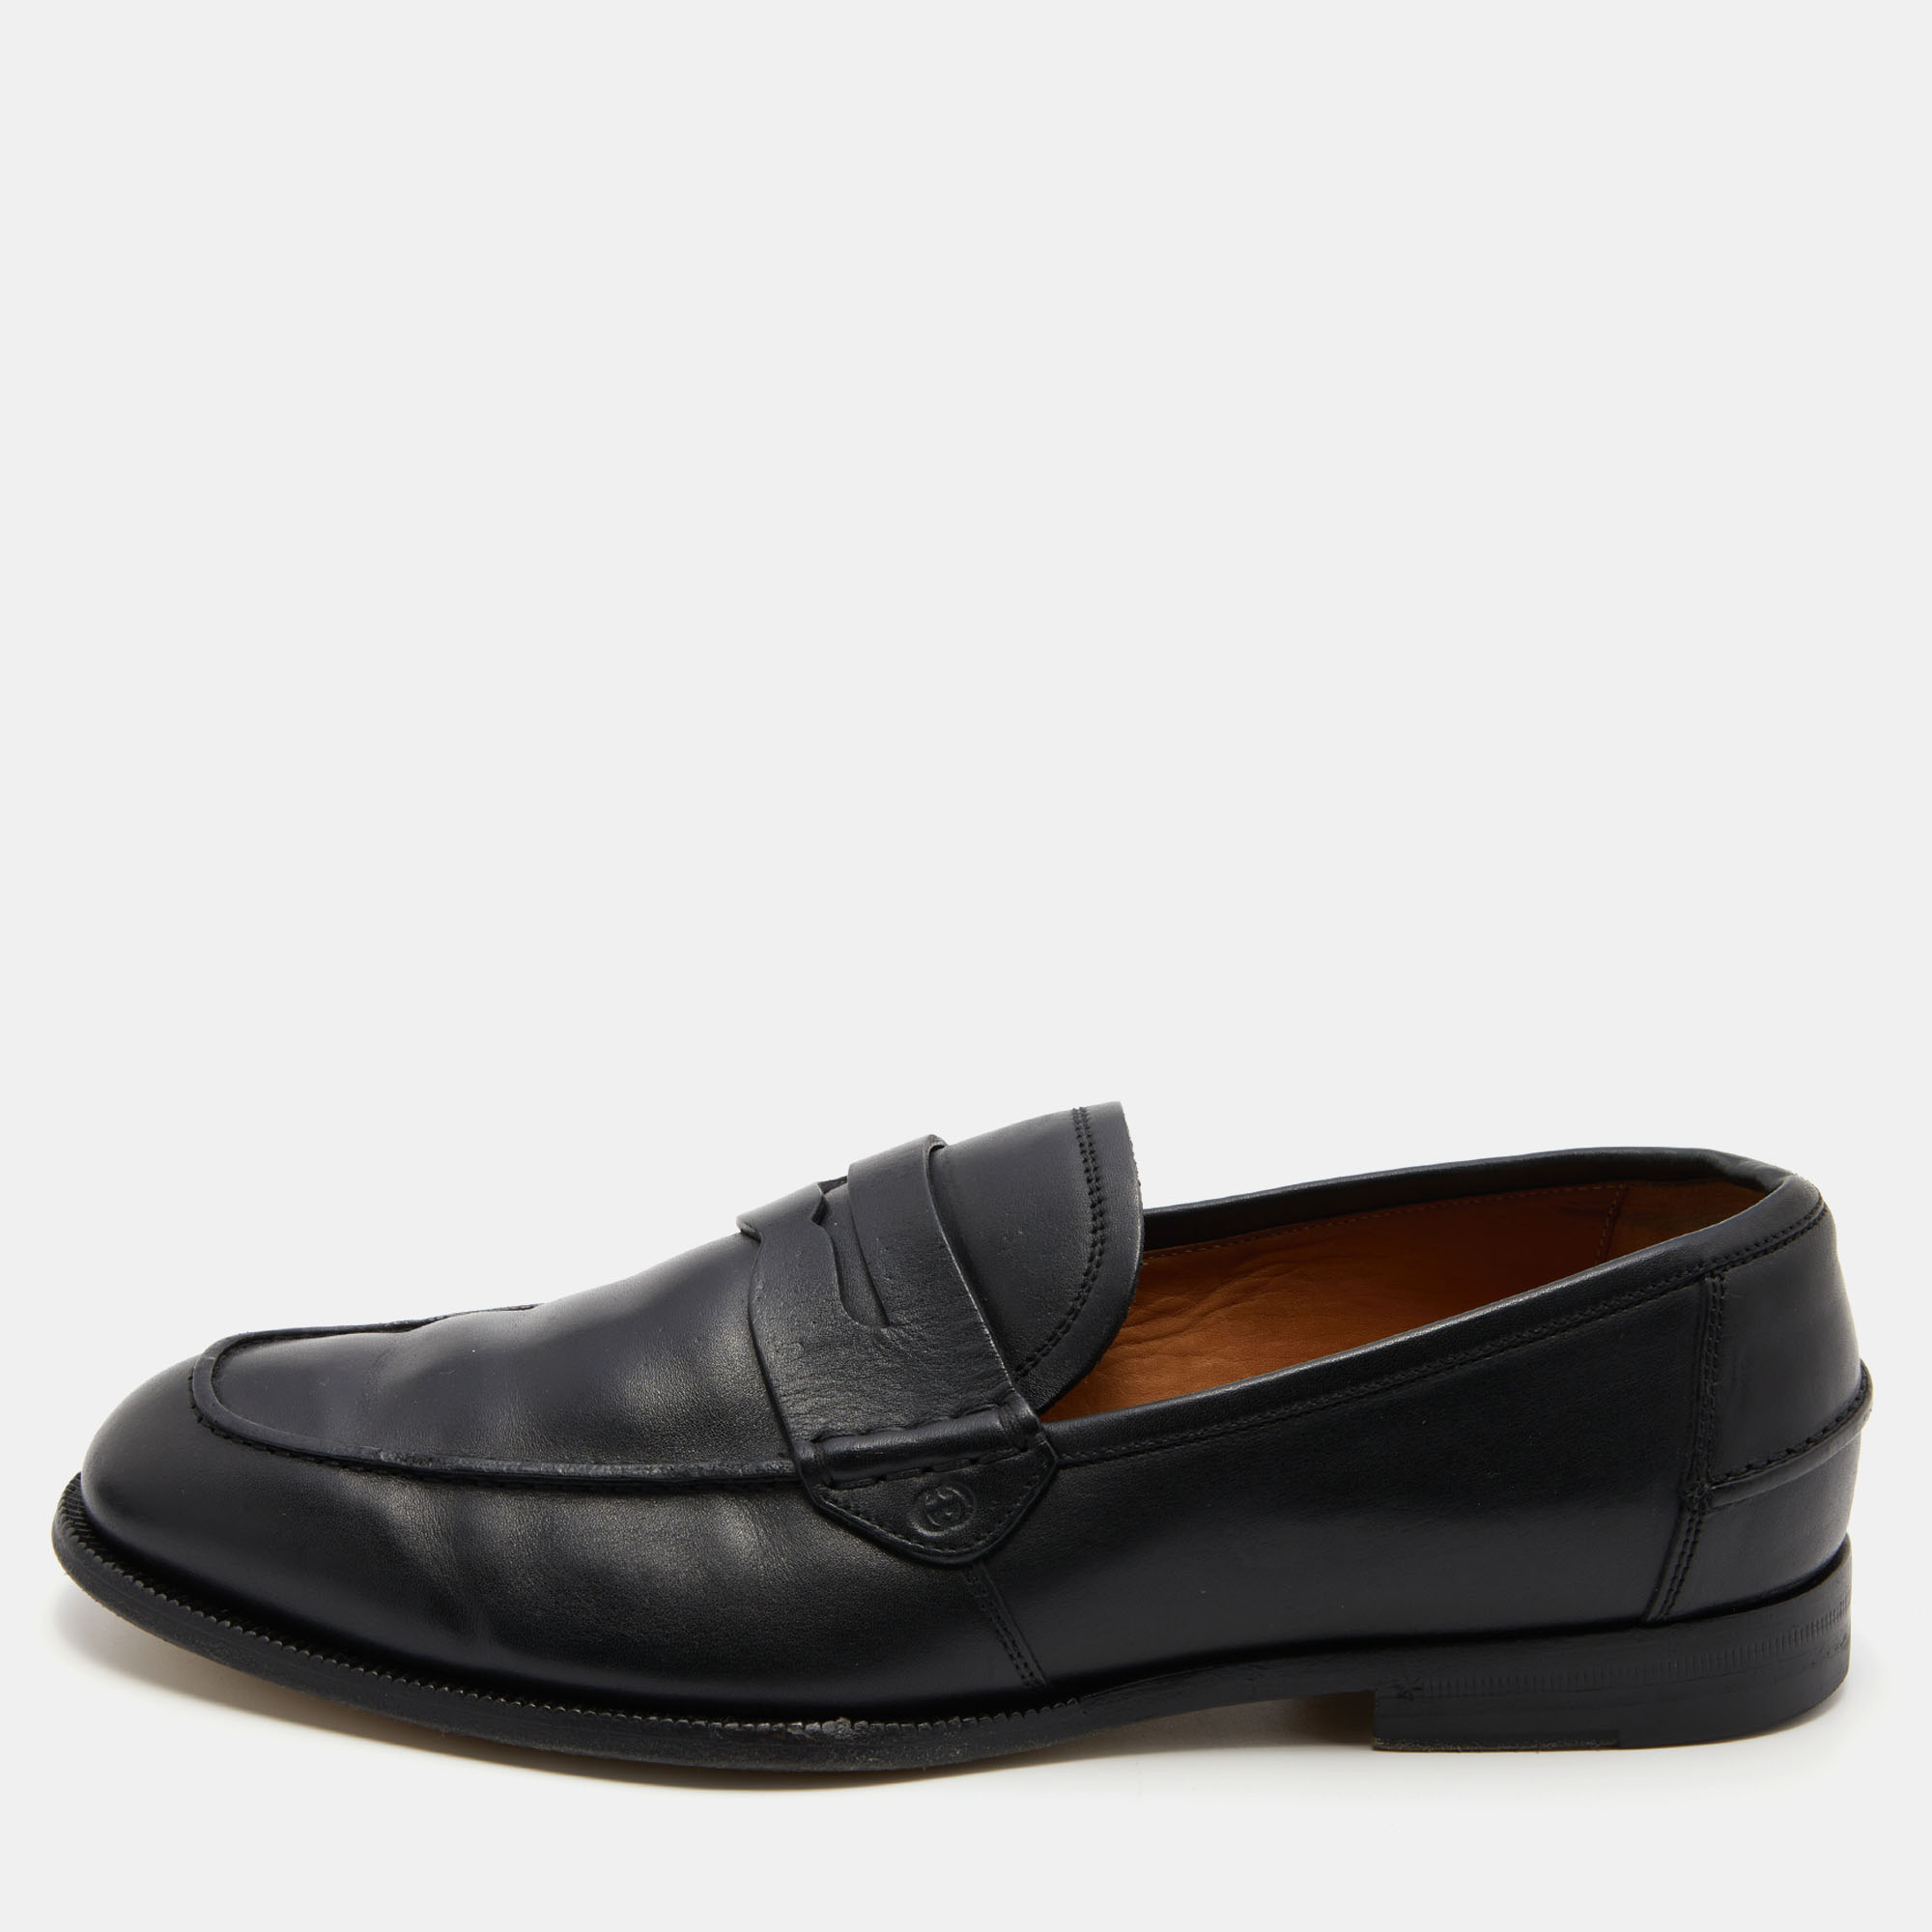 

Gucci Black Leather Slip On Penny Loafers Size 42.5